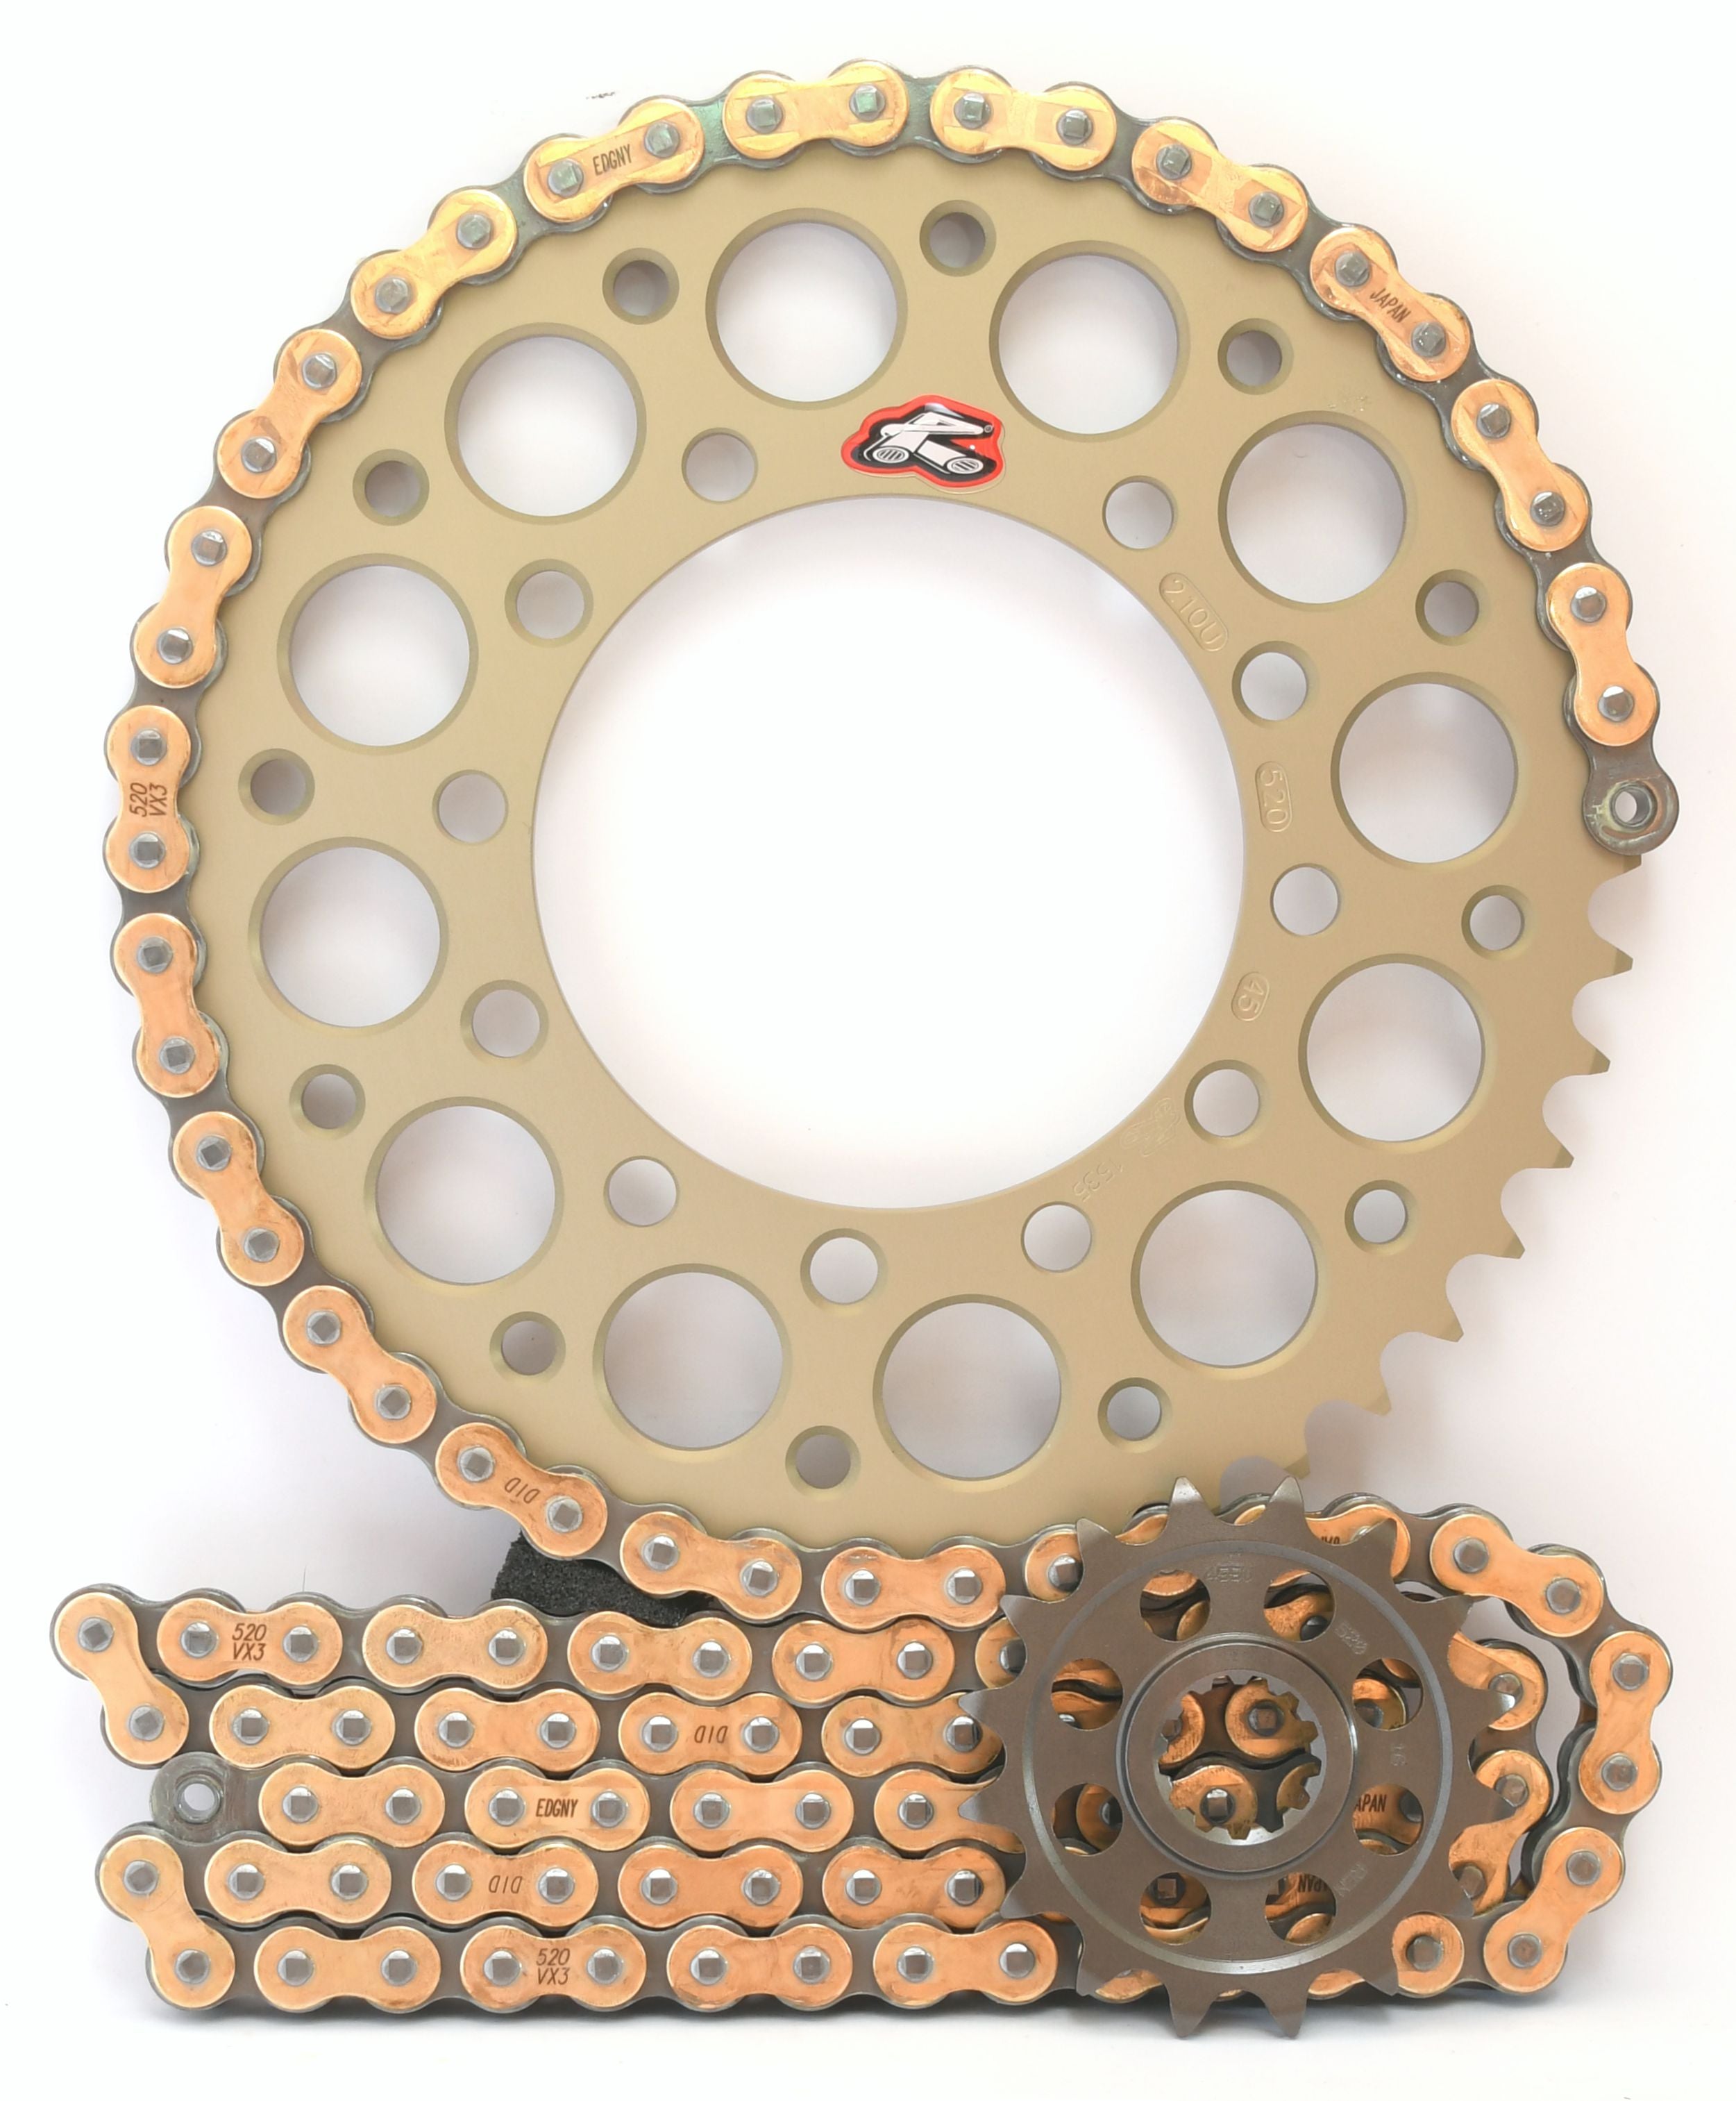 Renthal Ultralight and DID Chain & Sprocket Kit for Yamaha R6 2003-2005 (Inc S) - 520 Conversion - Standard Gearing